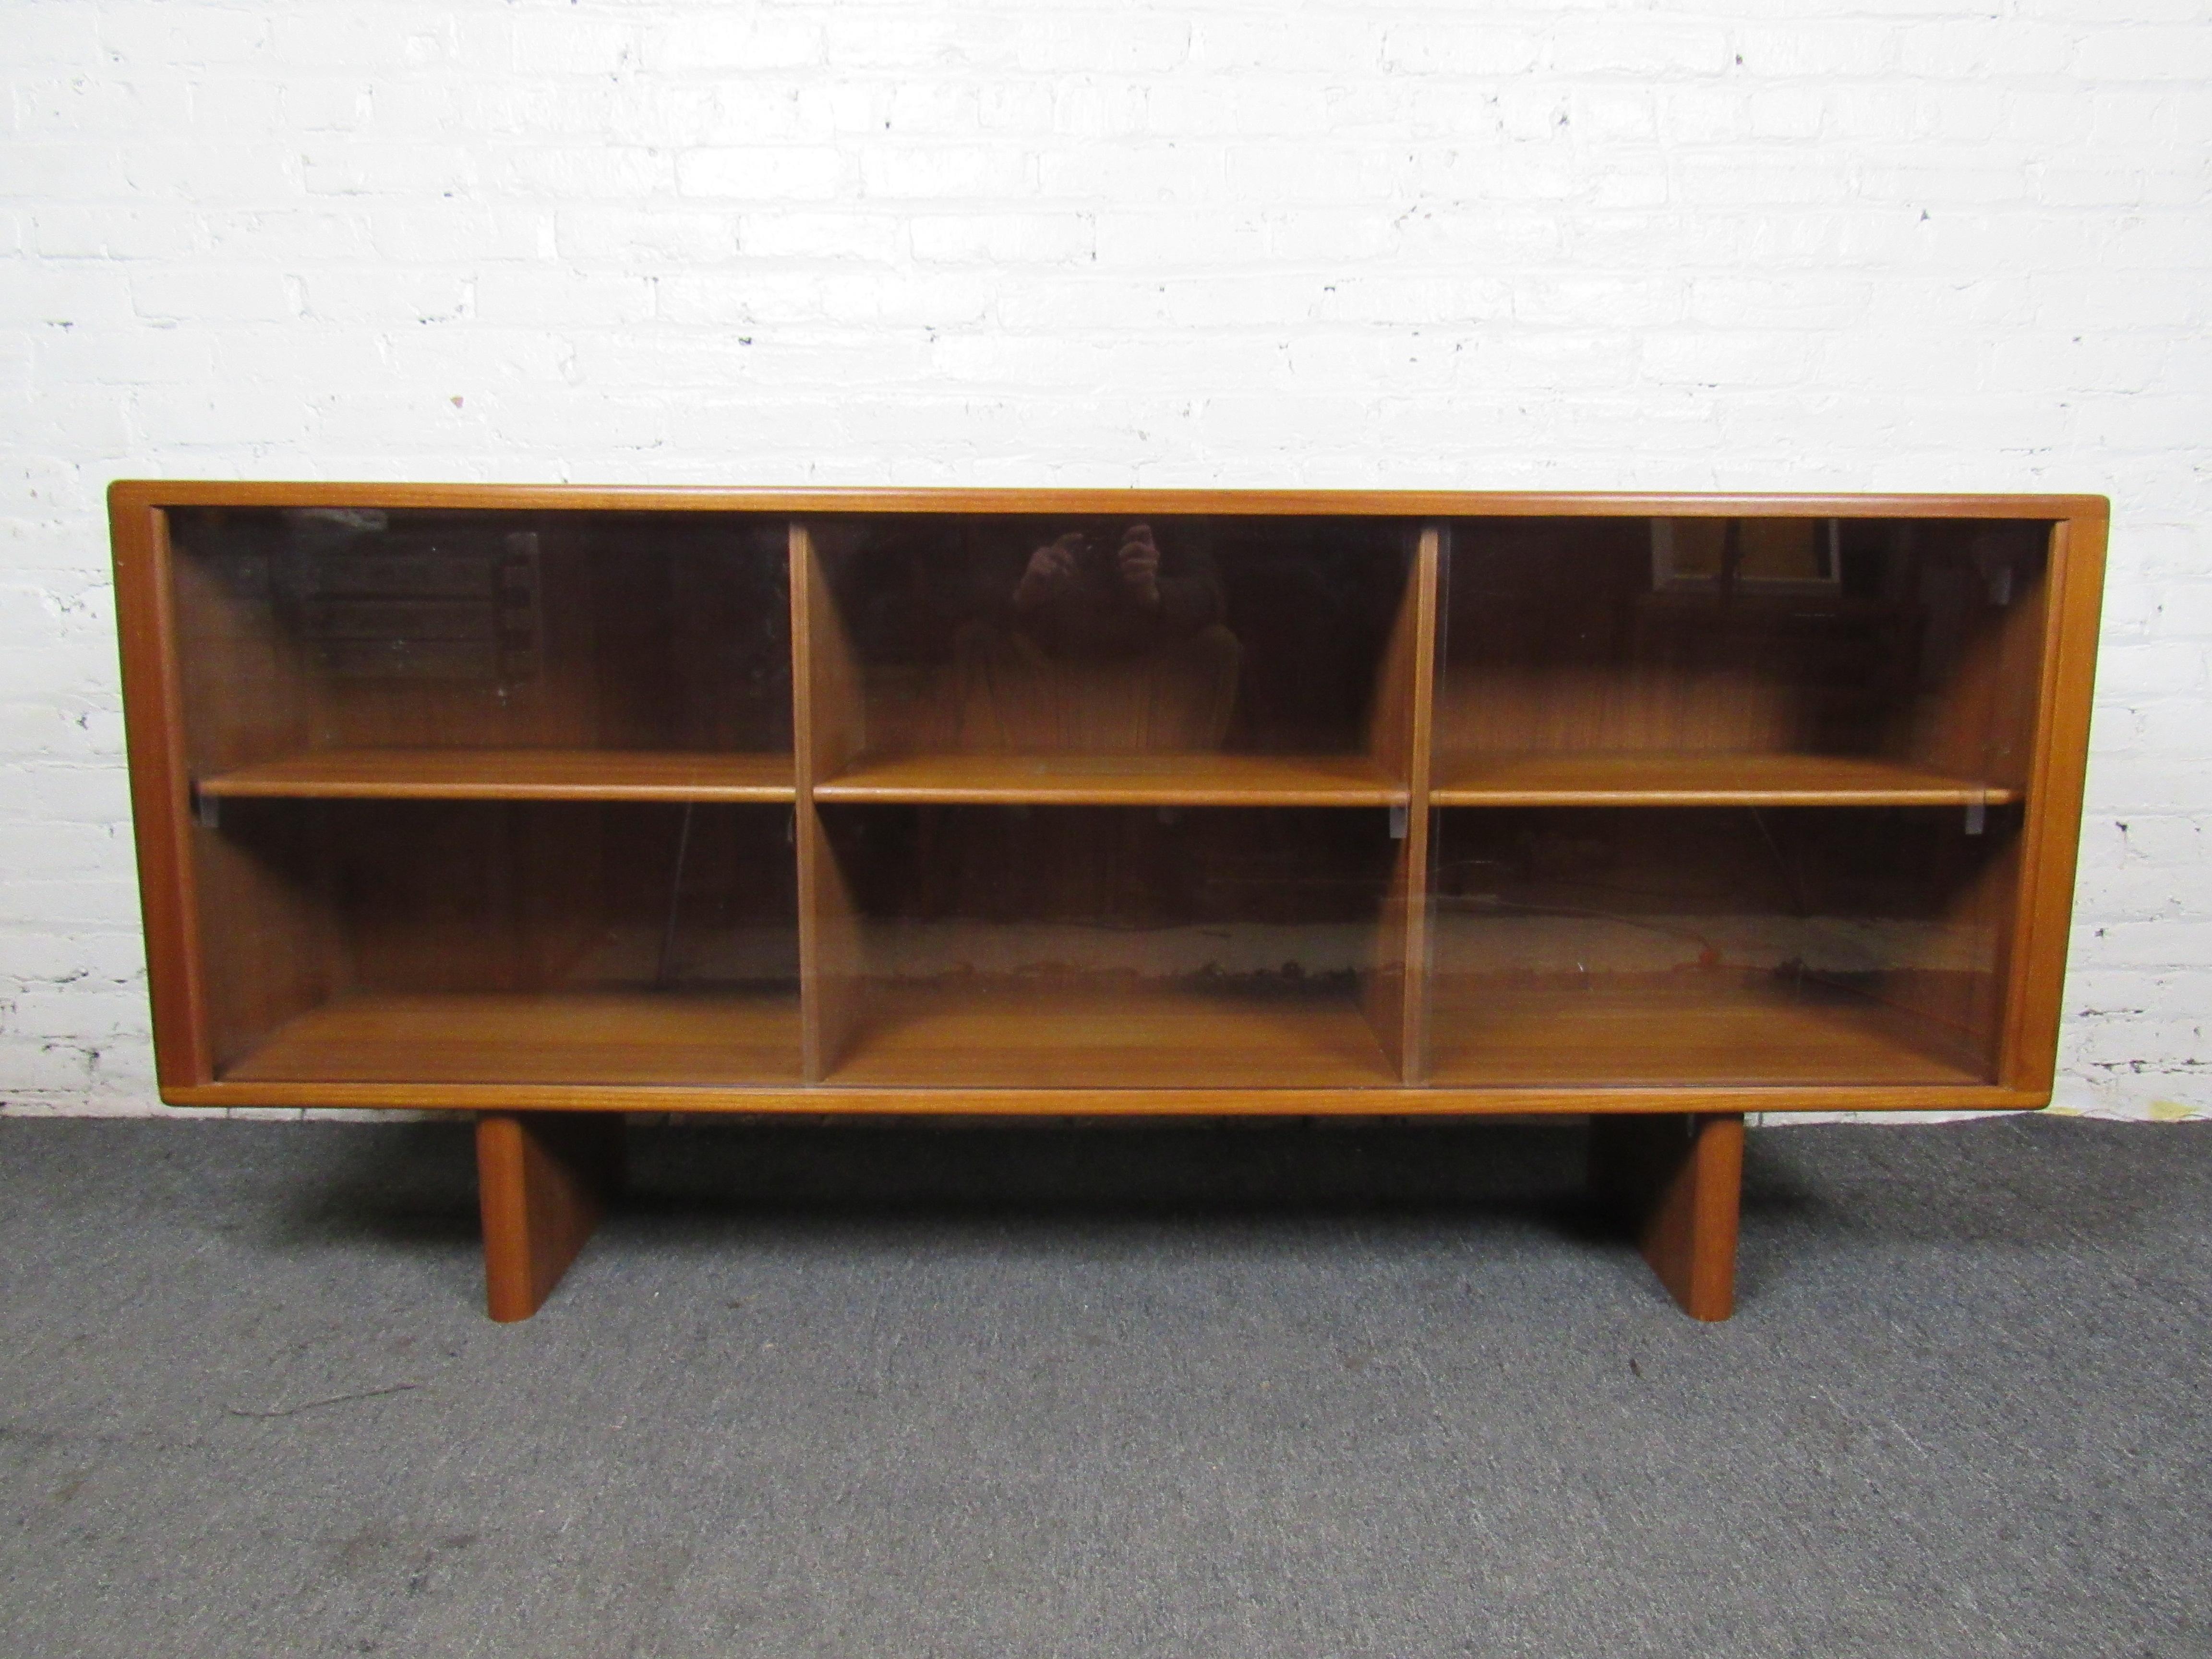 This vintage teak bookcase features a unique design that allows it to be used as a console. Sliding glass doors accent a rich teak woodgrain and Mid-Century Modern design. Please confirm item location with seller (NY/NJ).